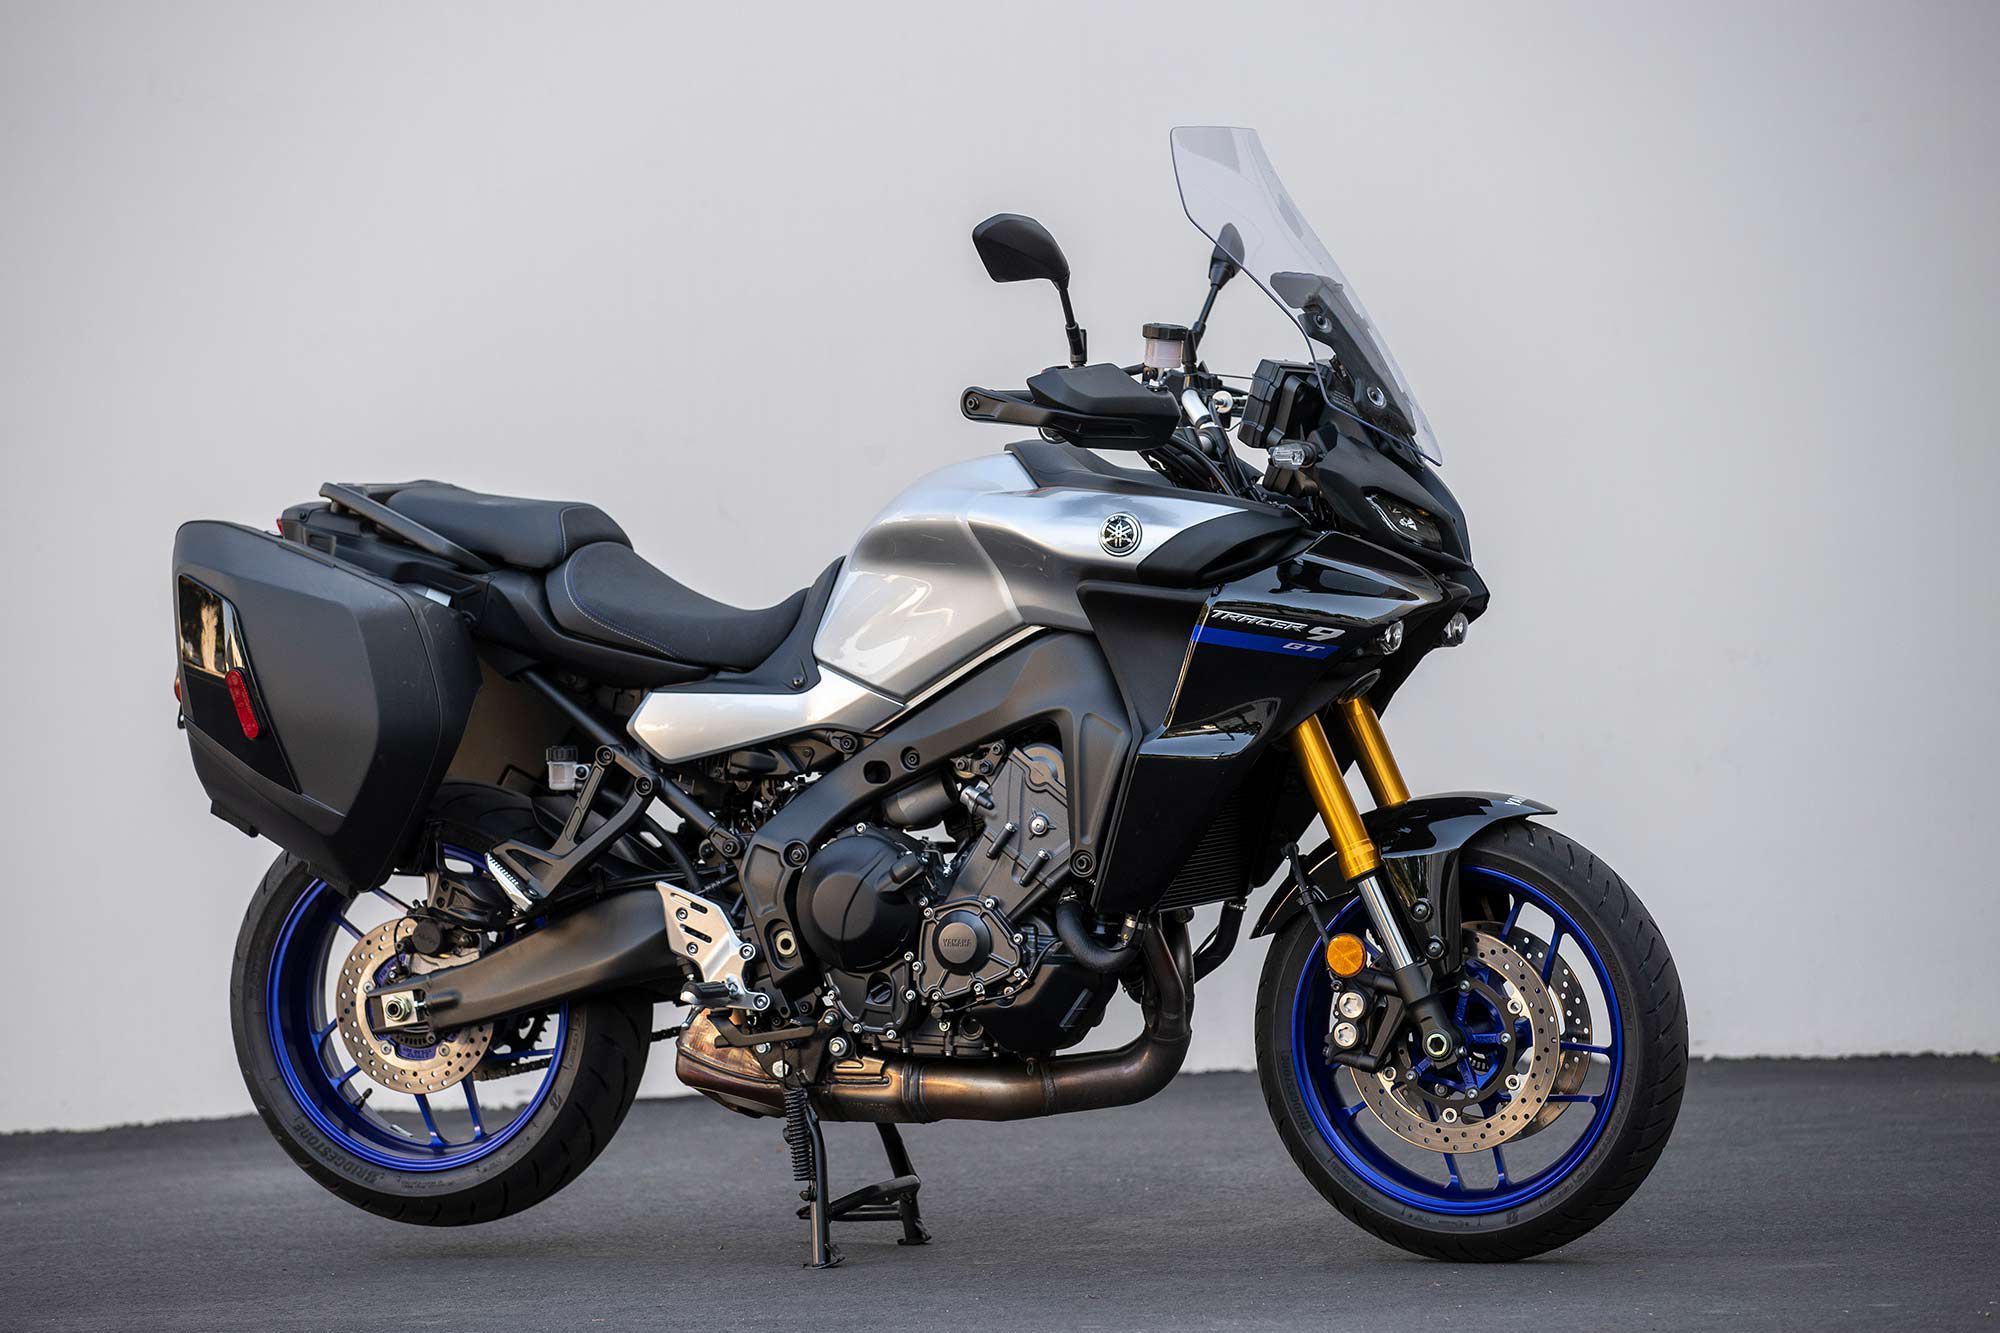 Yamaha outfitted the Tracer with up-spec and premium components for improved performance and comfort, and ultimately upping the ante. The Tracer 9 GT retails for $14,899—a $1,900 increase over the outgoing Tracer 900 GT.